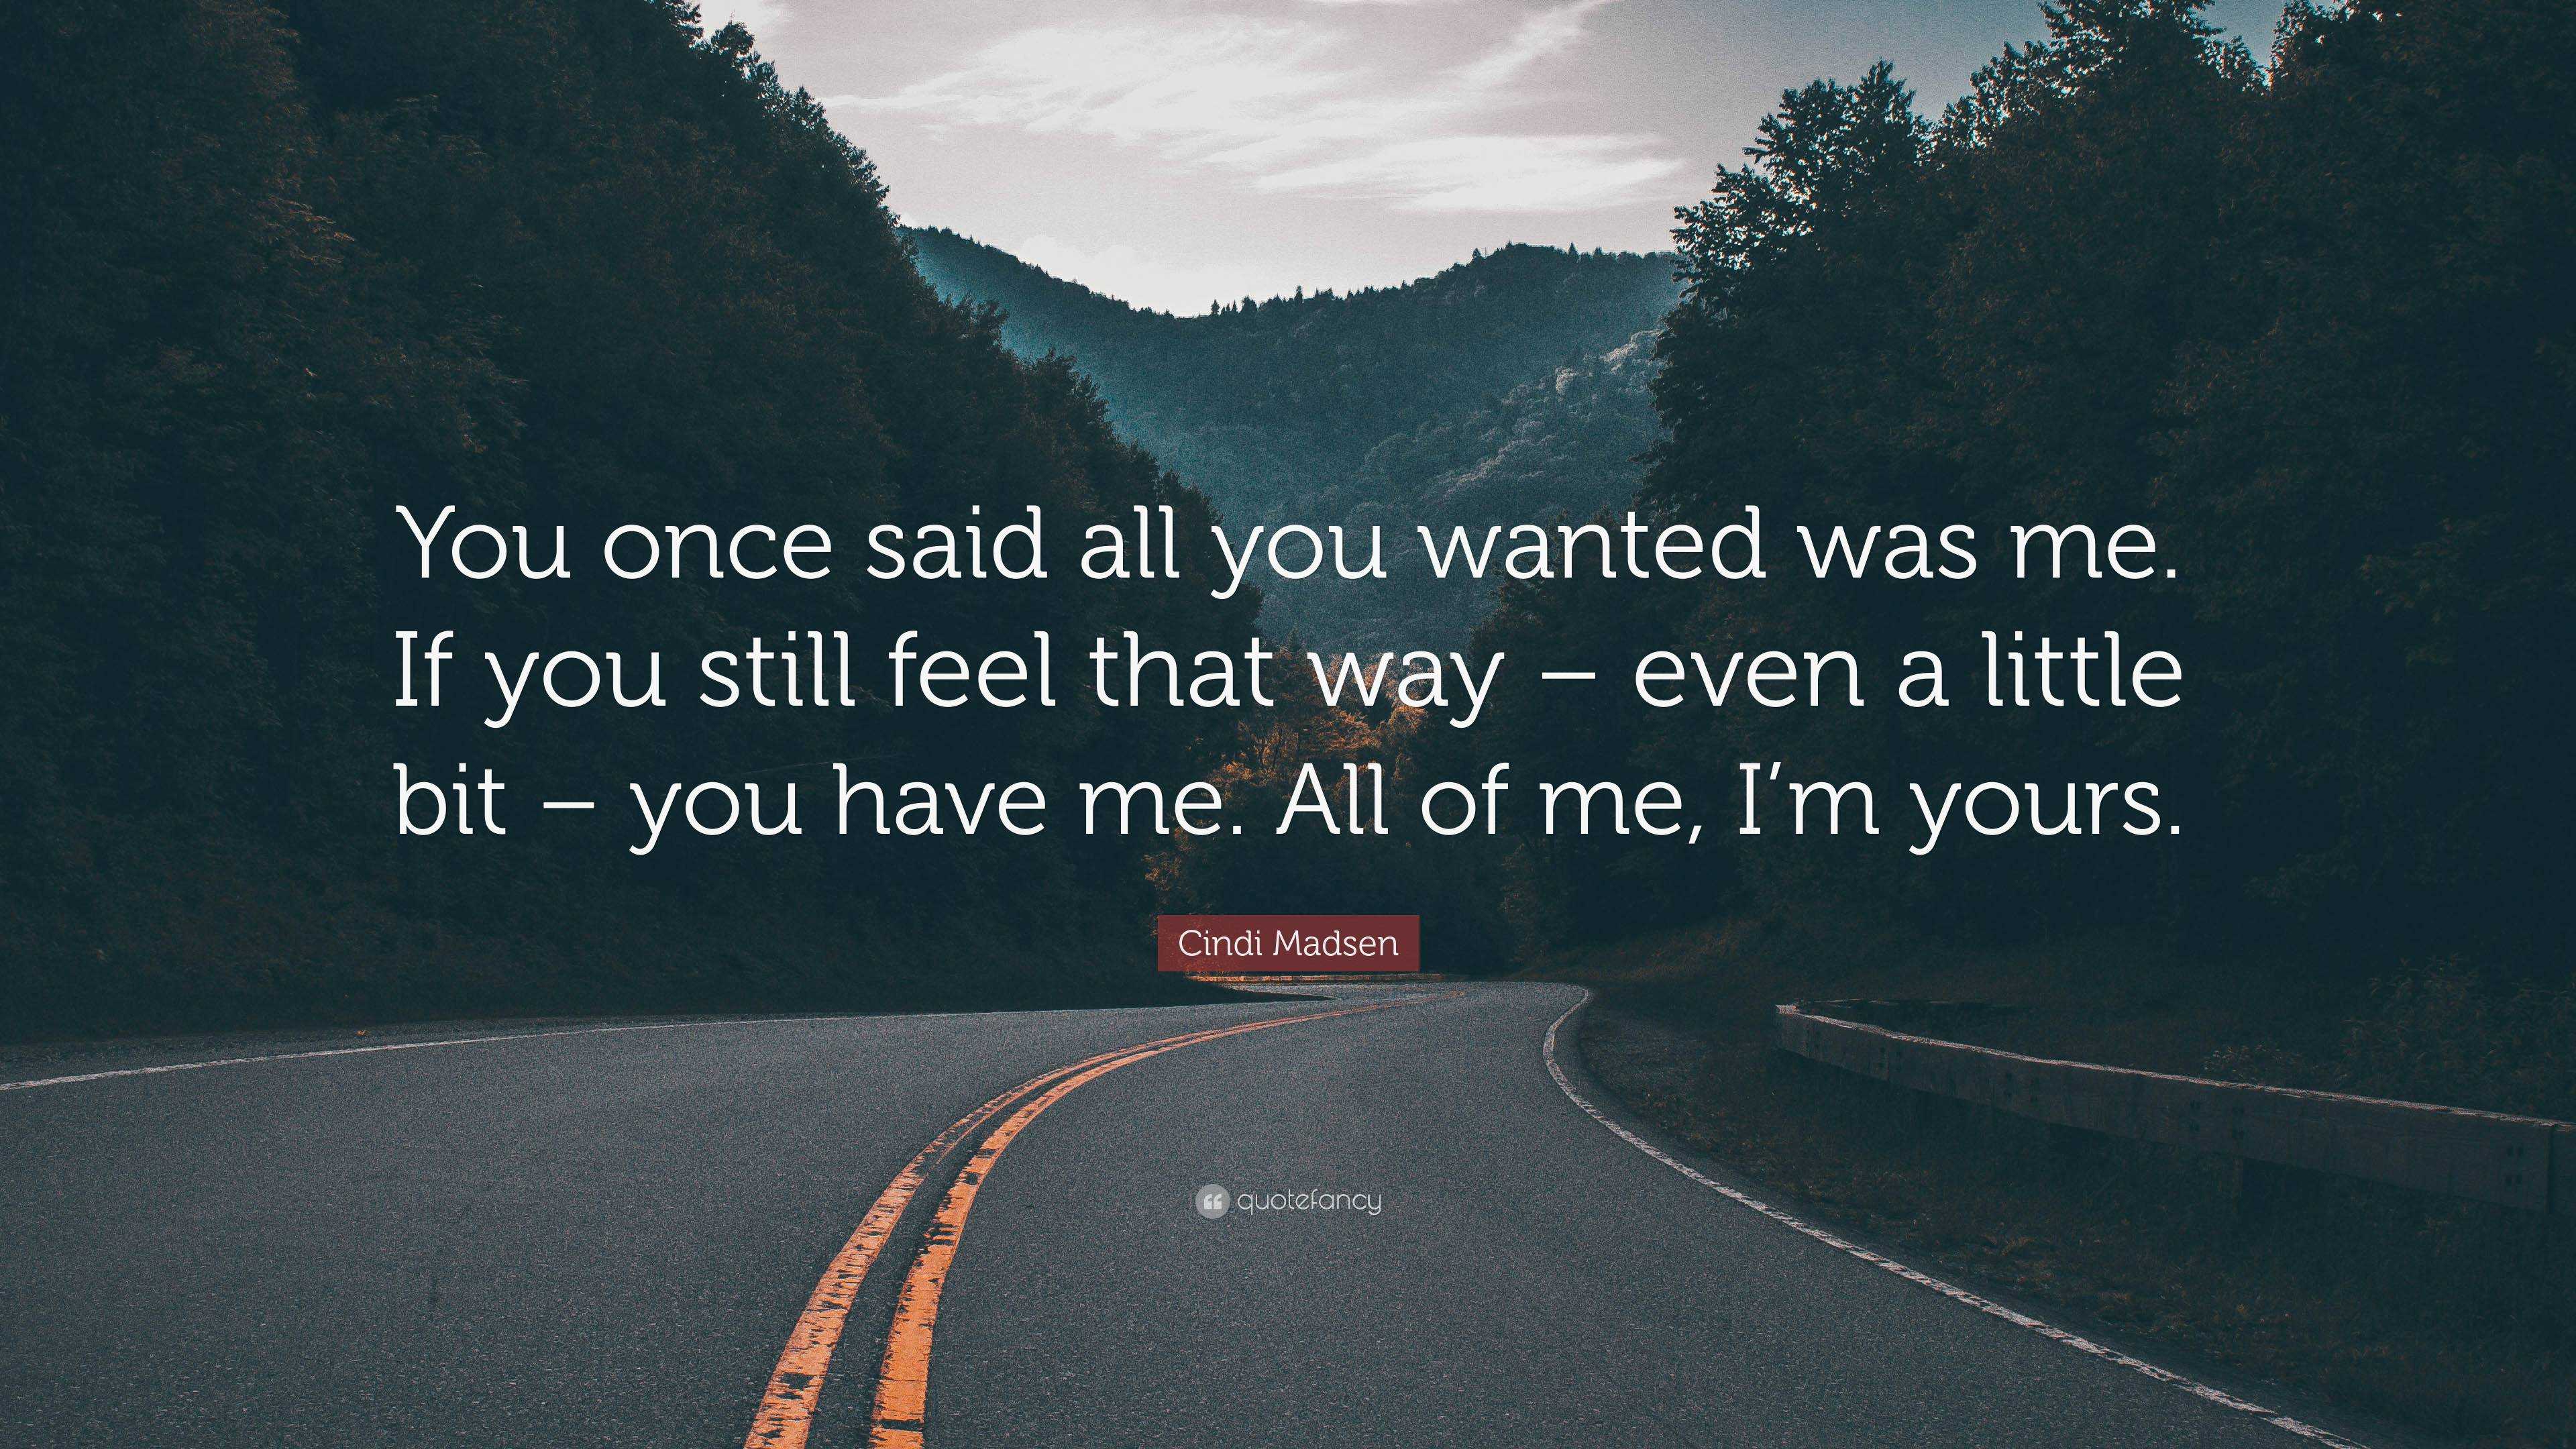 Cindi Madsen Quote: “You once said all you wanted was me. If you still ...